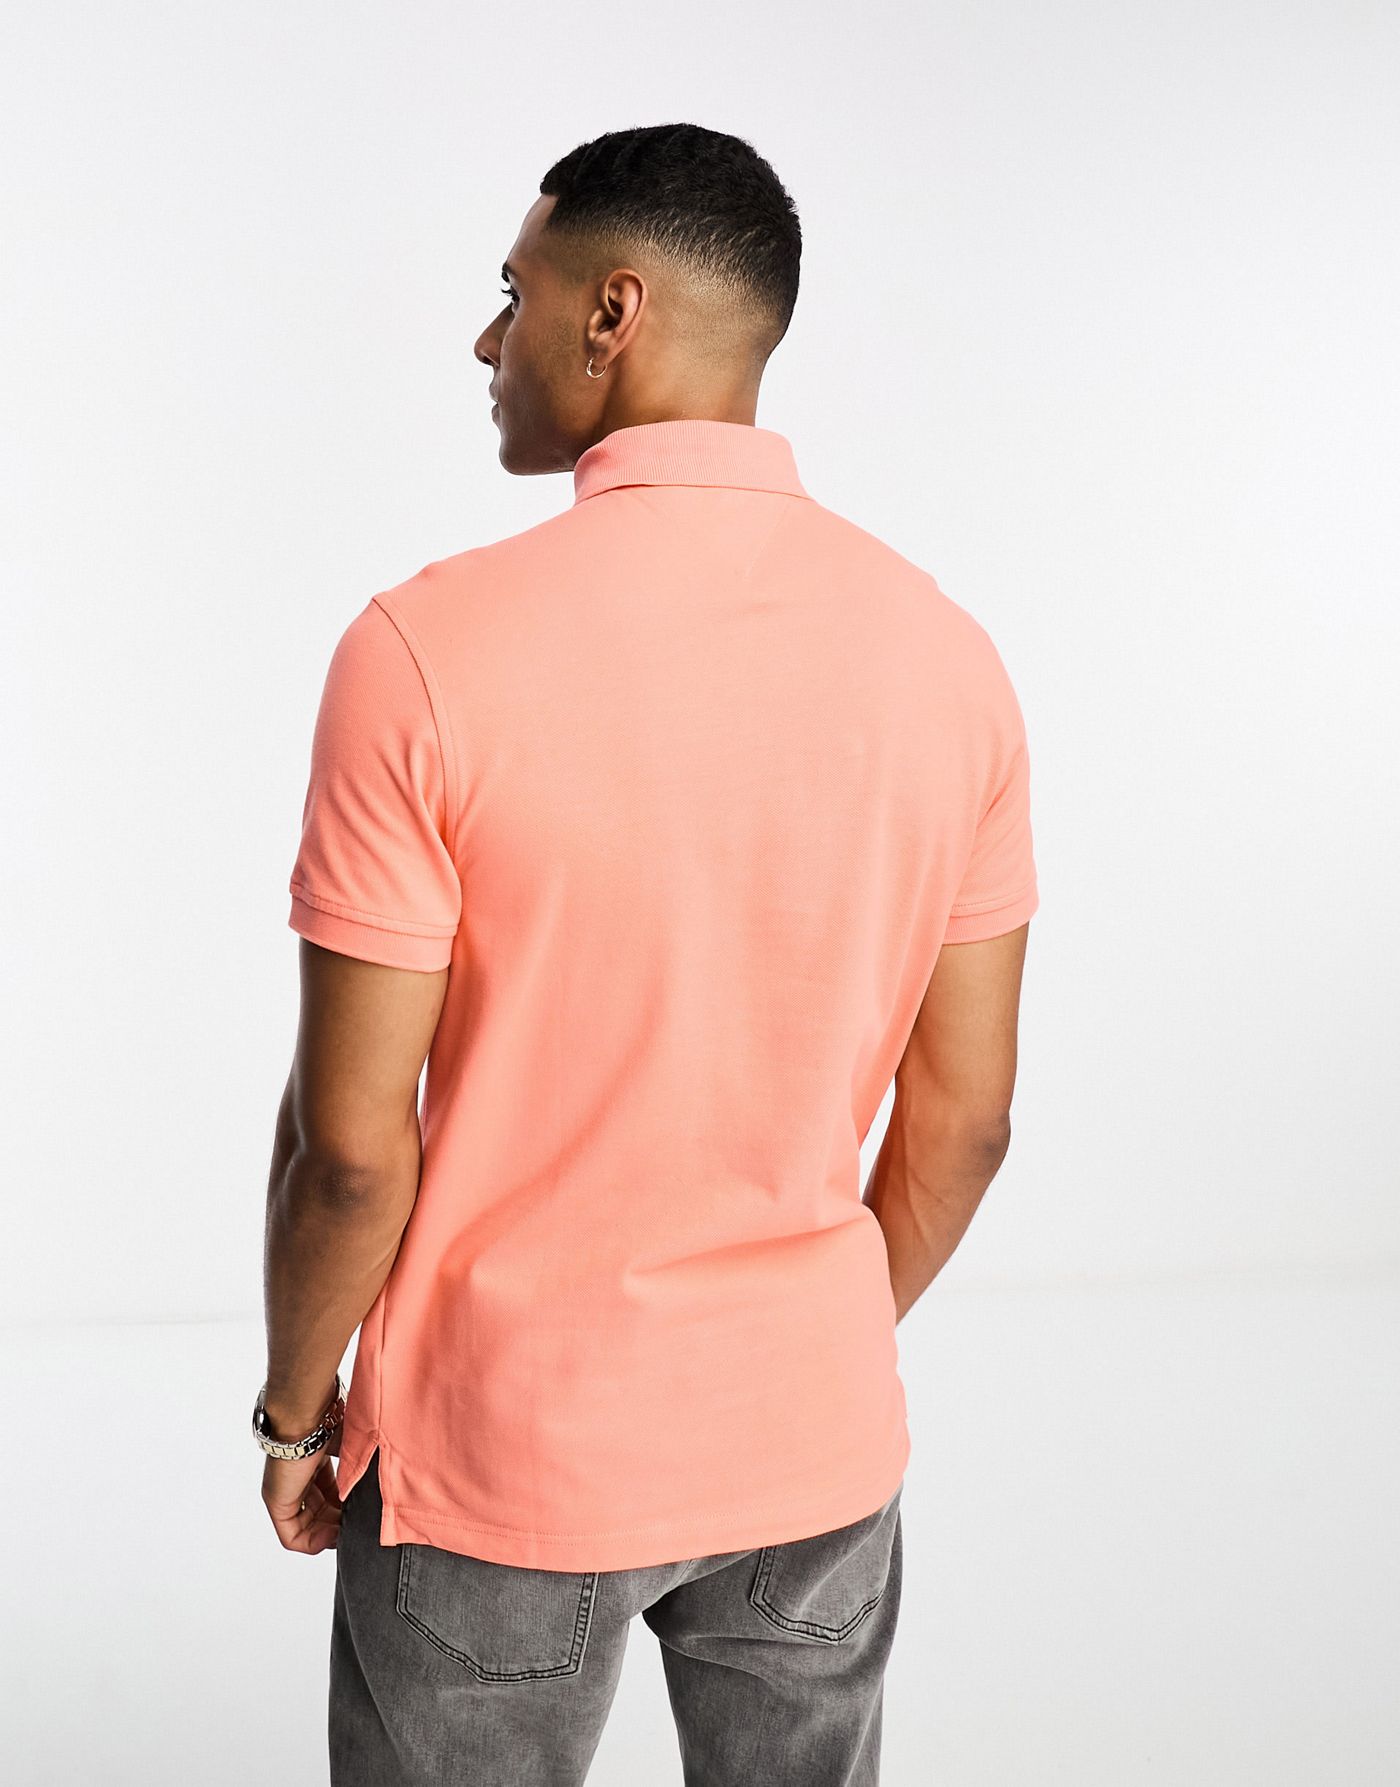 Tommy Hilfiger 1985 slim fit polo top in apricot 